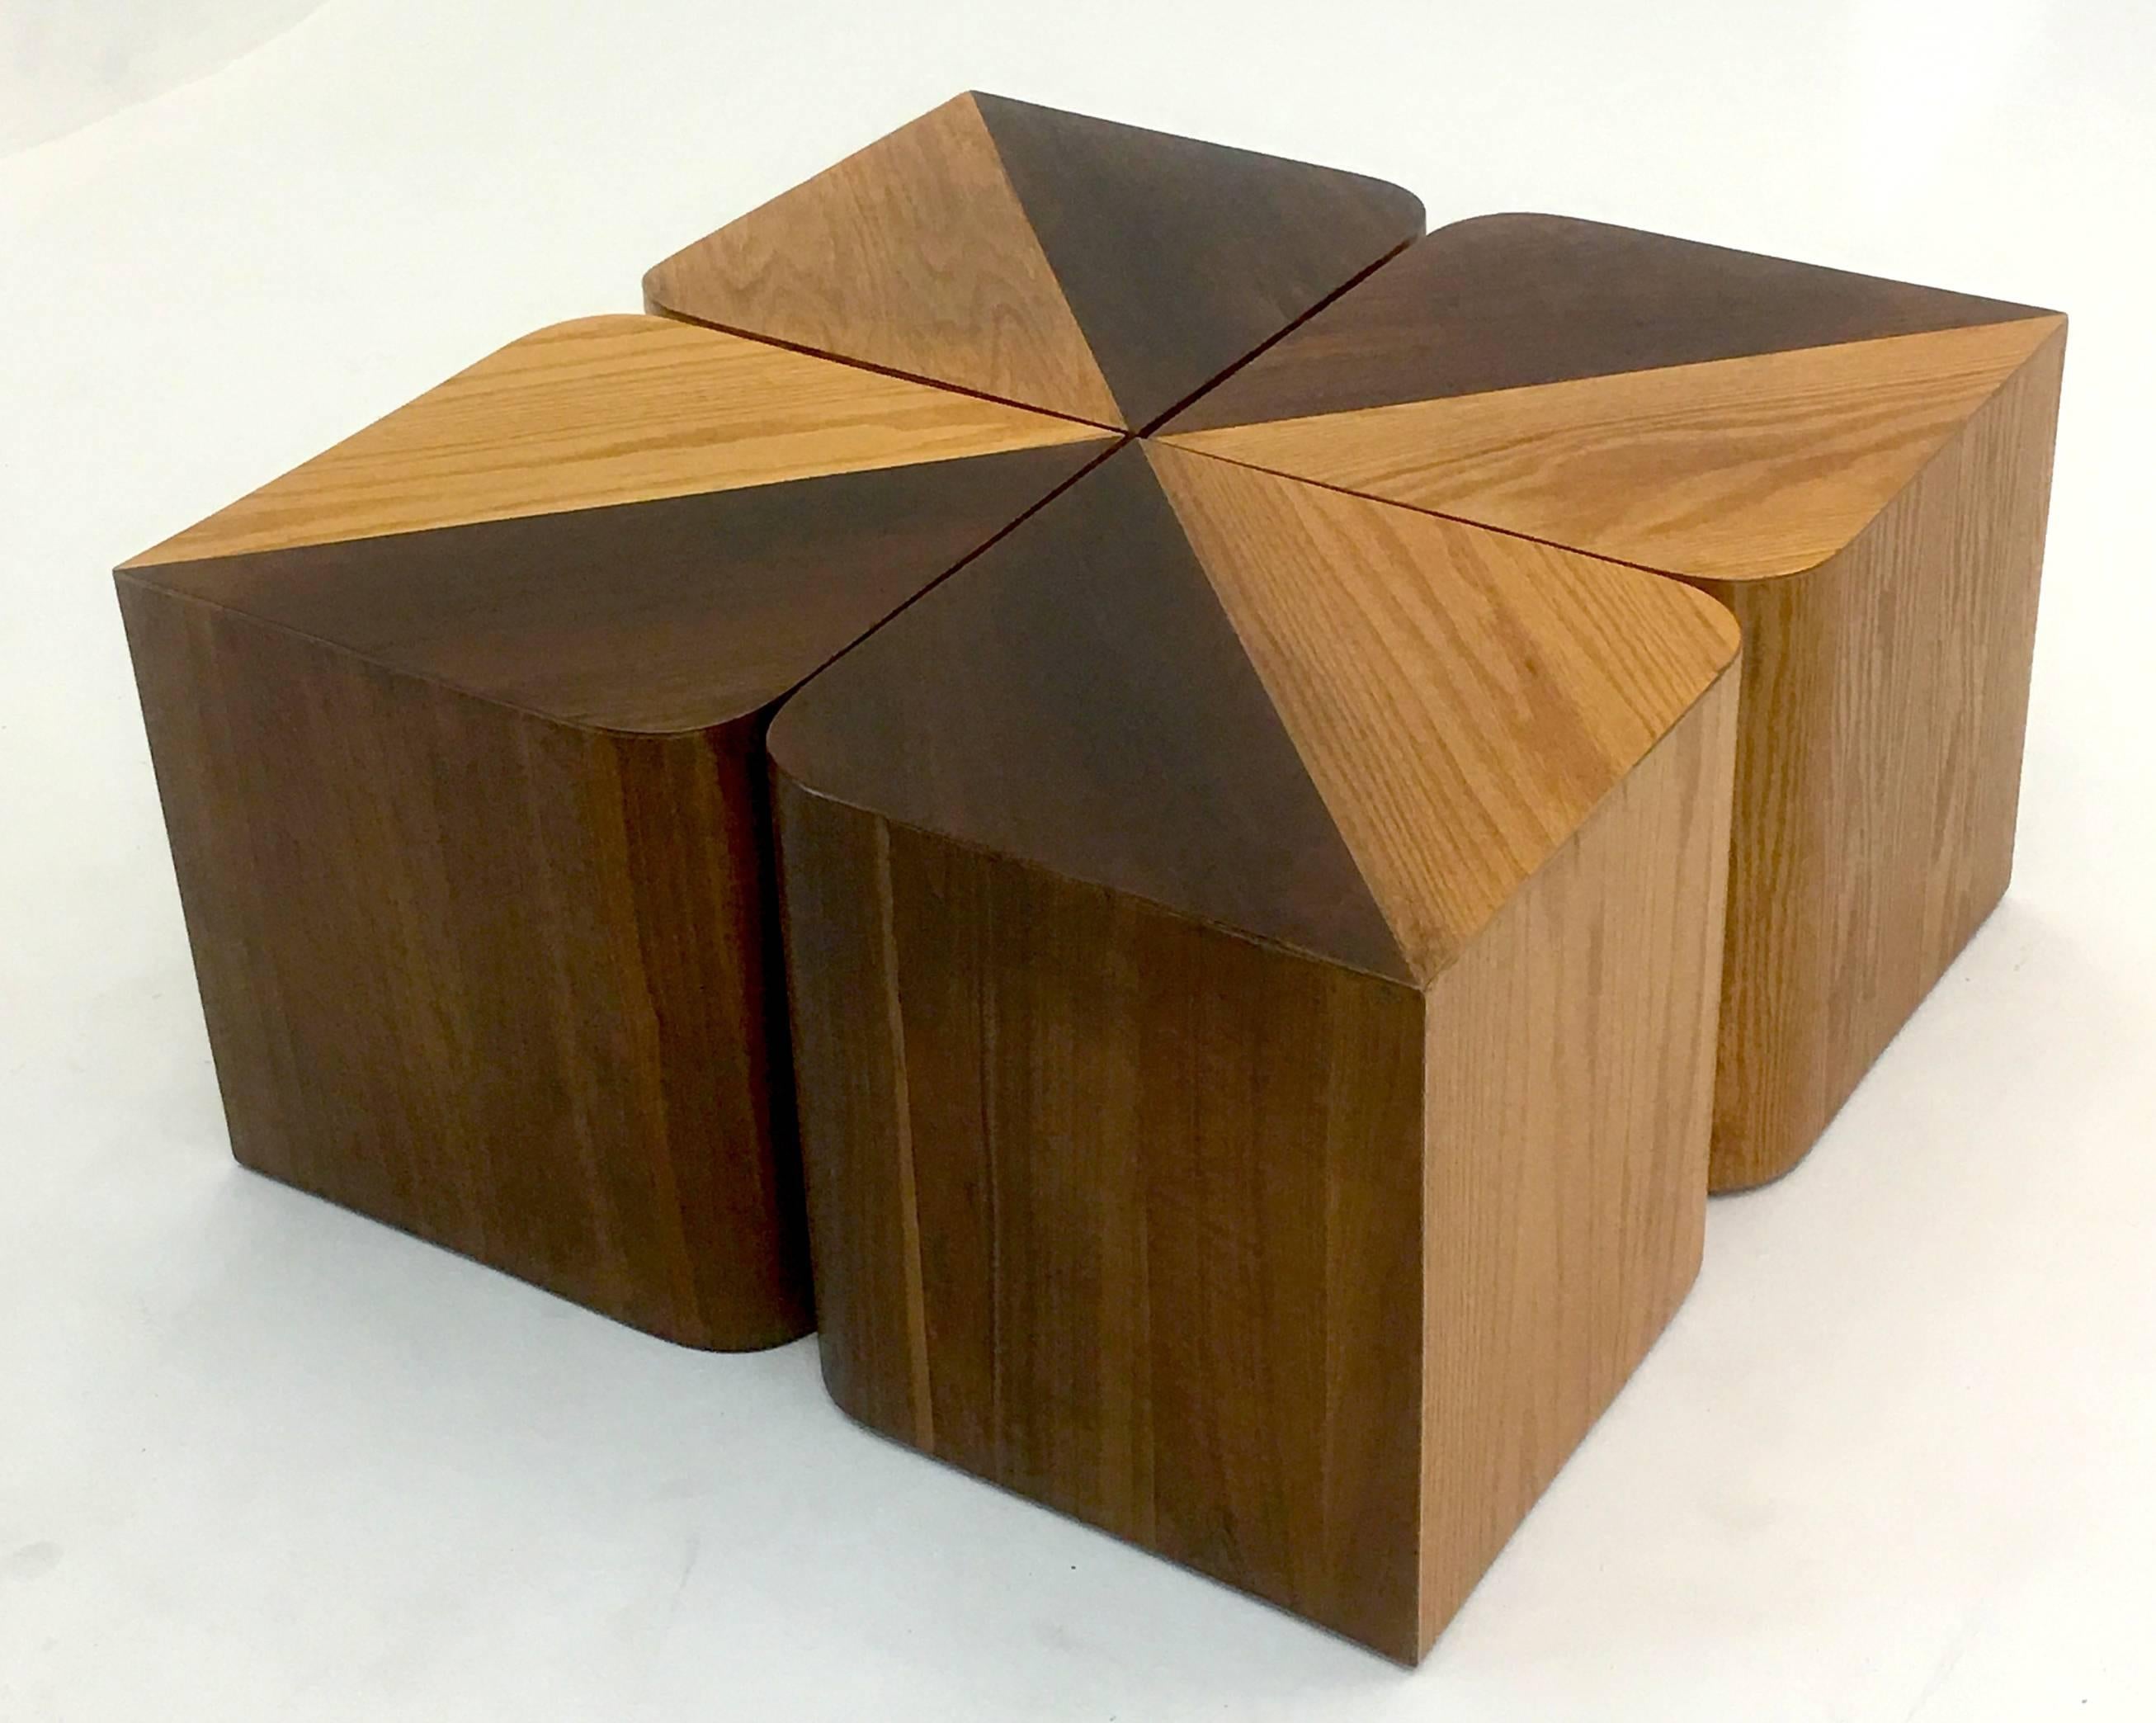 Produced by Habitat and designed by Paul Mayen, this four leaf clover designed styled coffee table is comprised of four modular sectional cubes in contrasting two tone ash and walnut wood. The modular nature allows multiple configurations for use as